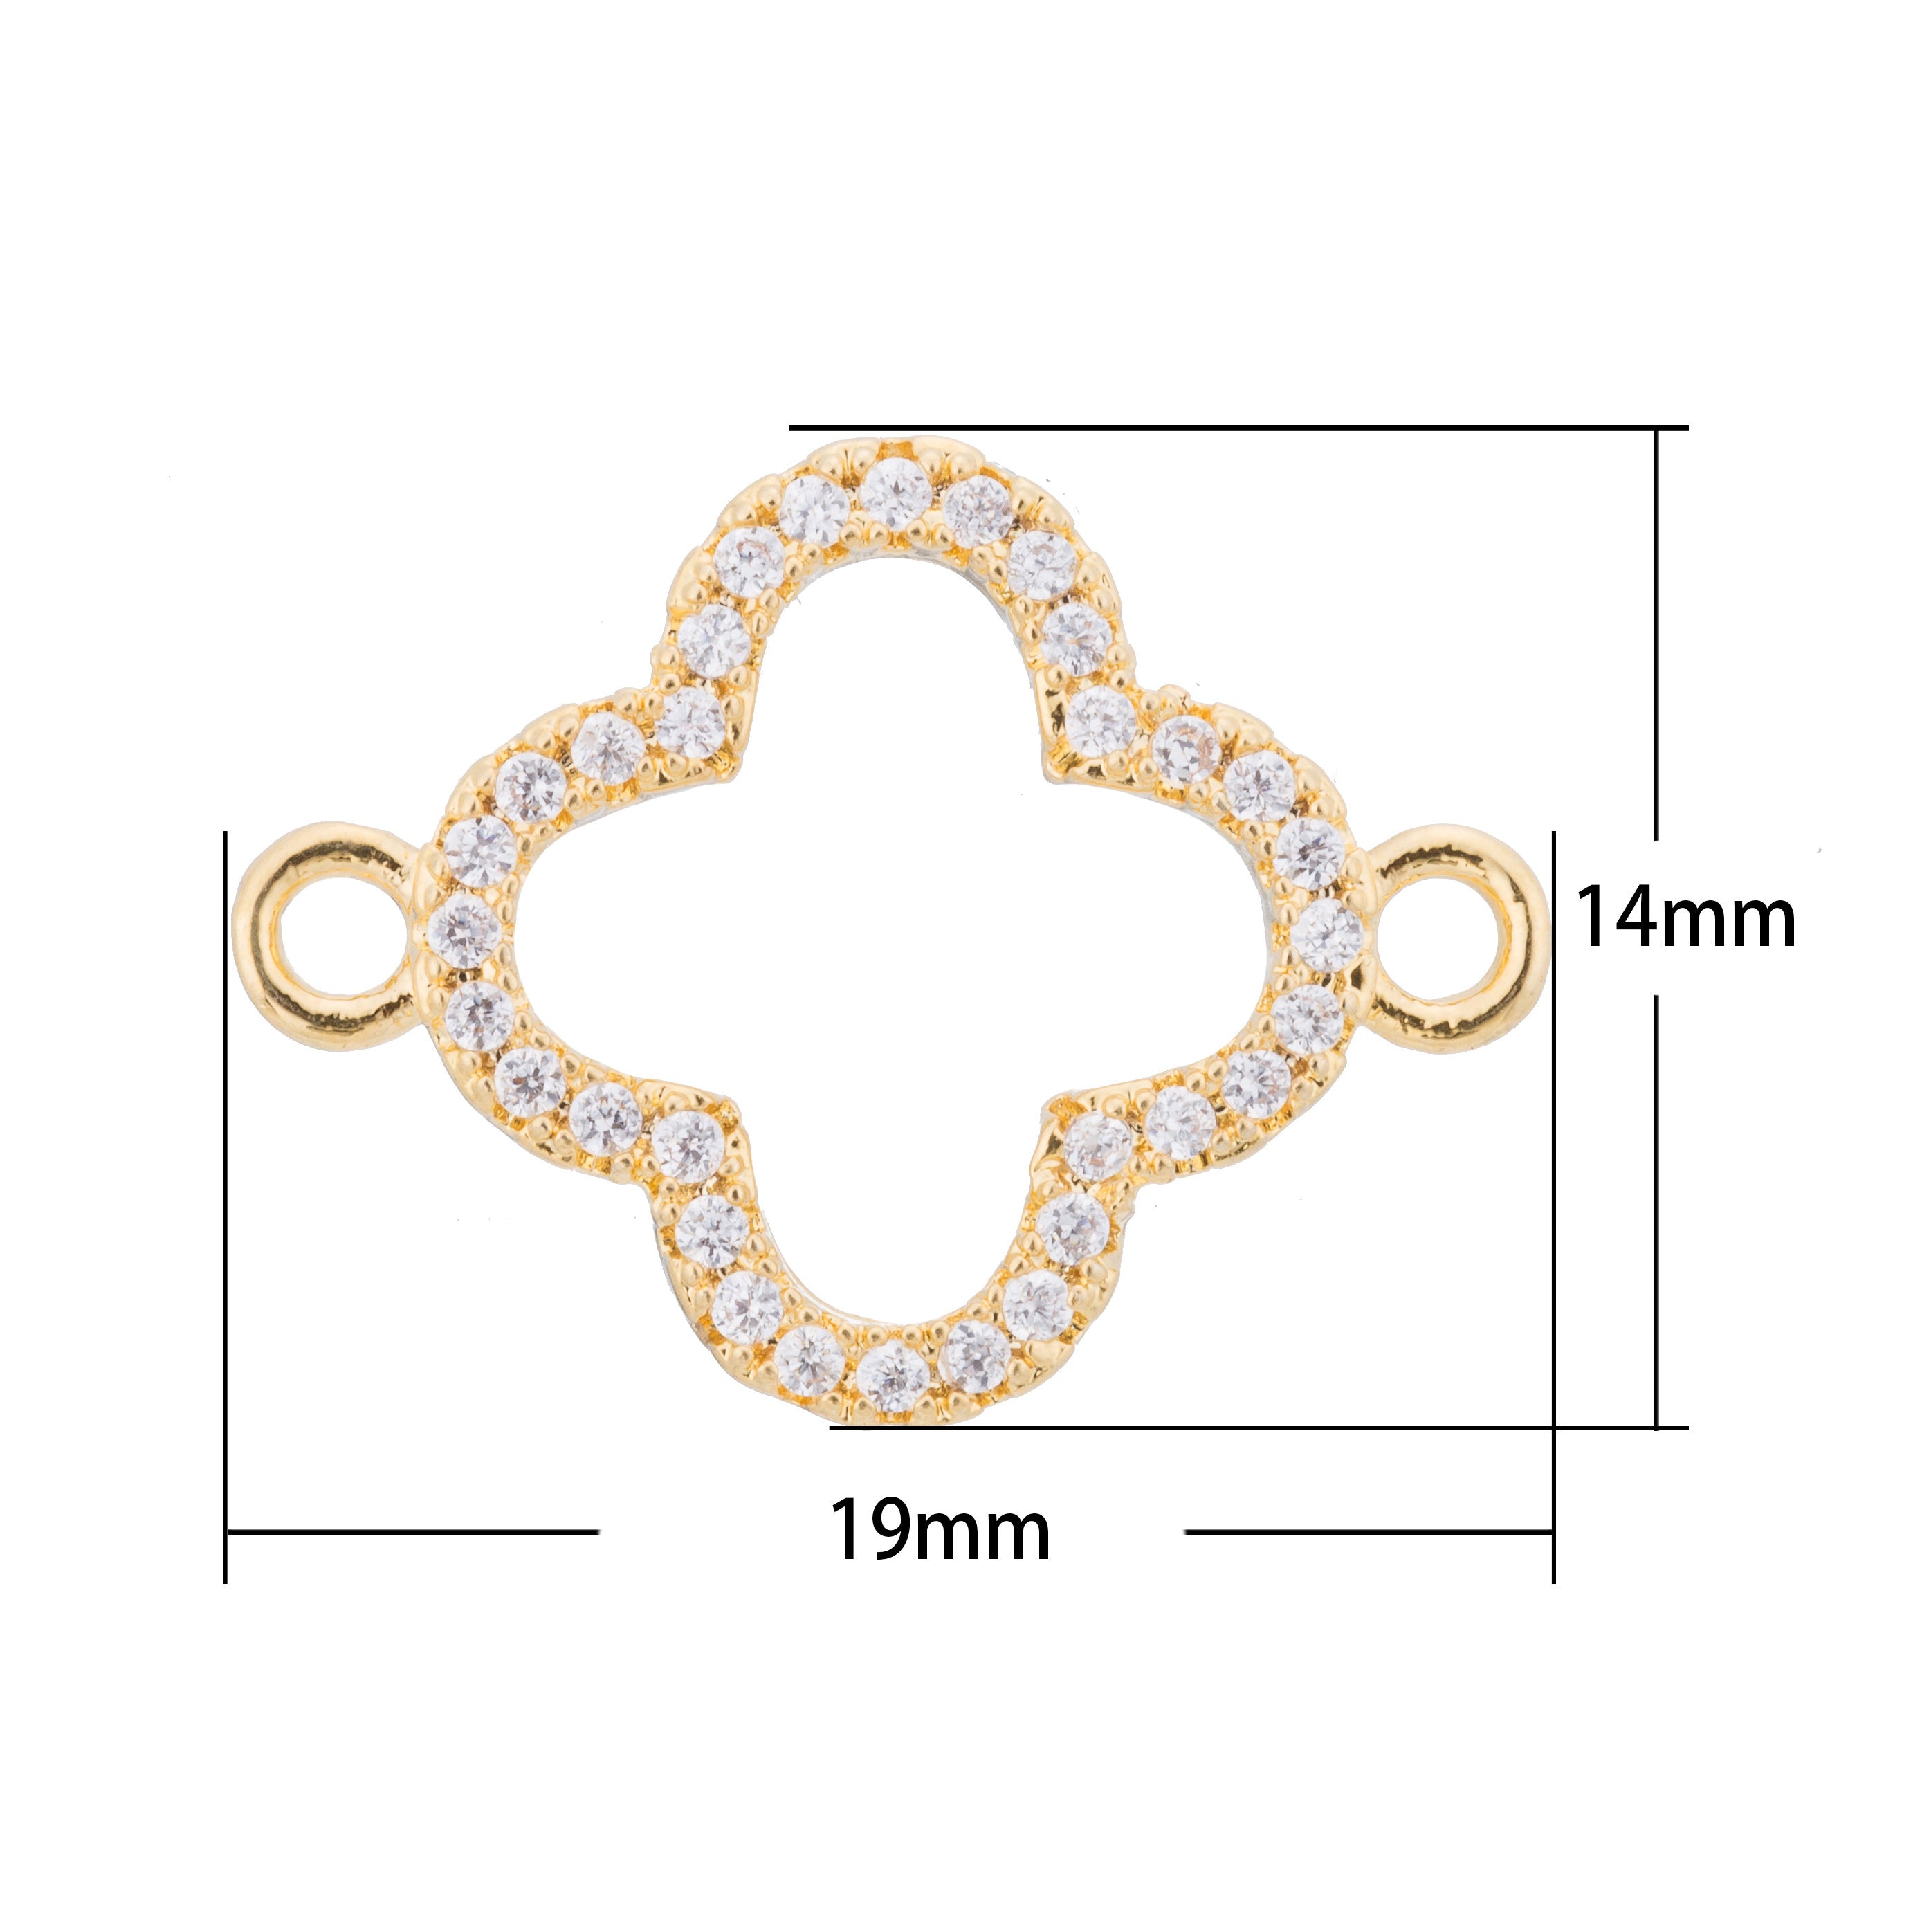 Gold Daisy Flower Gold Clover Leaf Beads Handmade DIY Gift Cubic Zirconia Bracelet Charm Bead Connector Gold Plated for Jewelry Making - DLUXCA